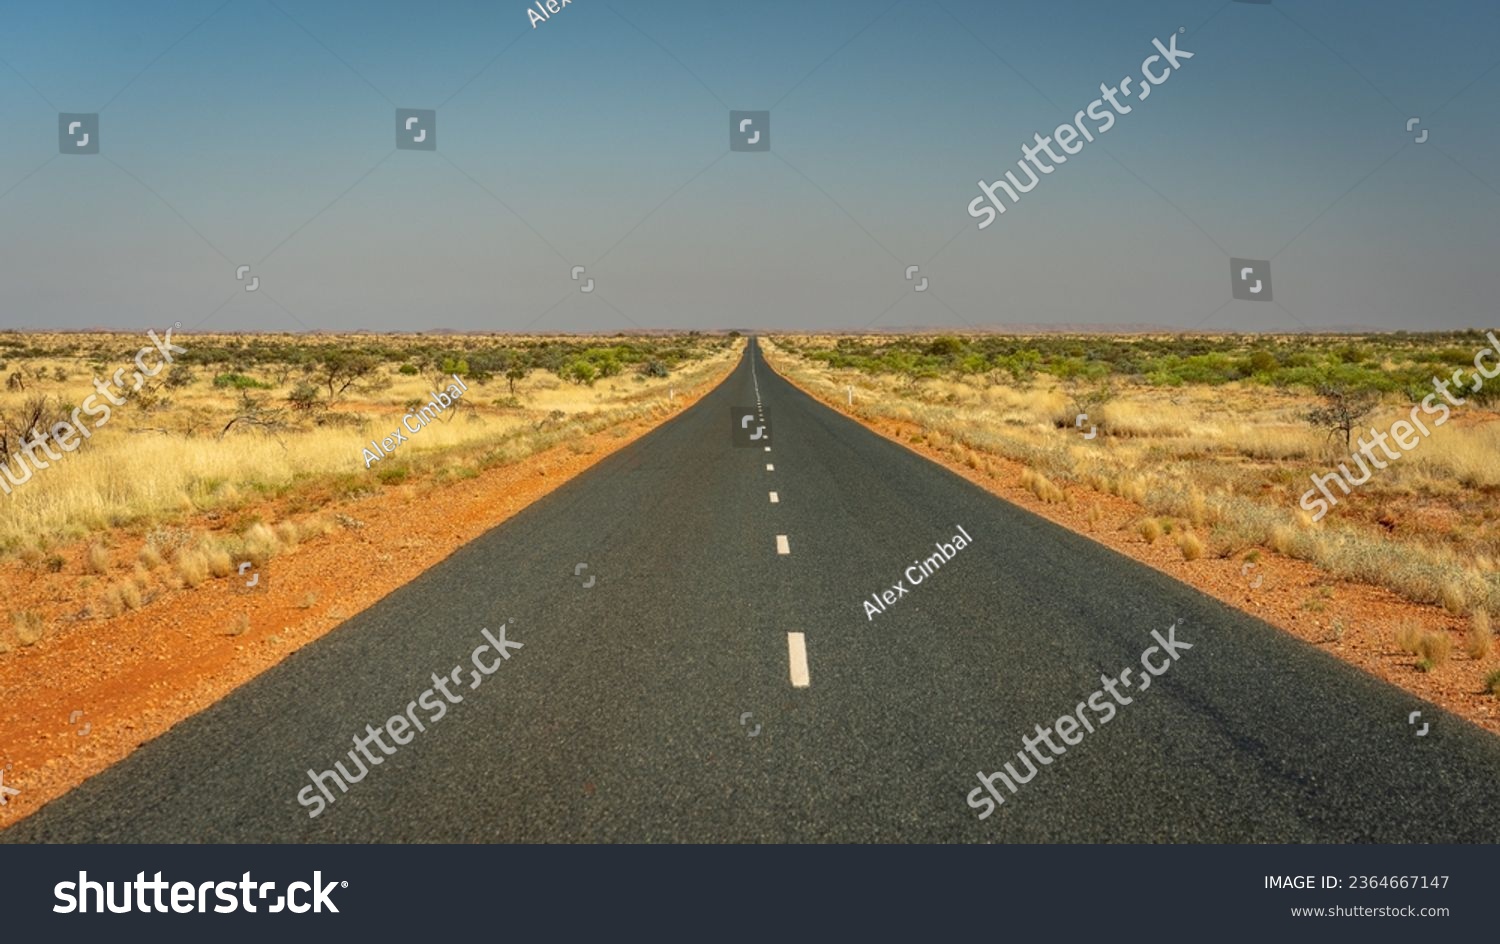 Outback road in Western Australia along the Great Northern Hwy #2364667147